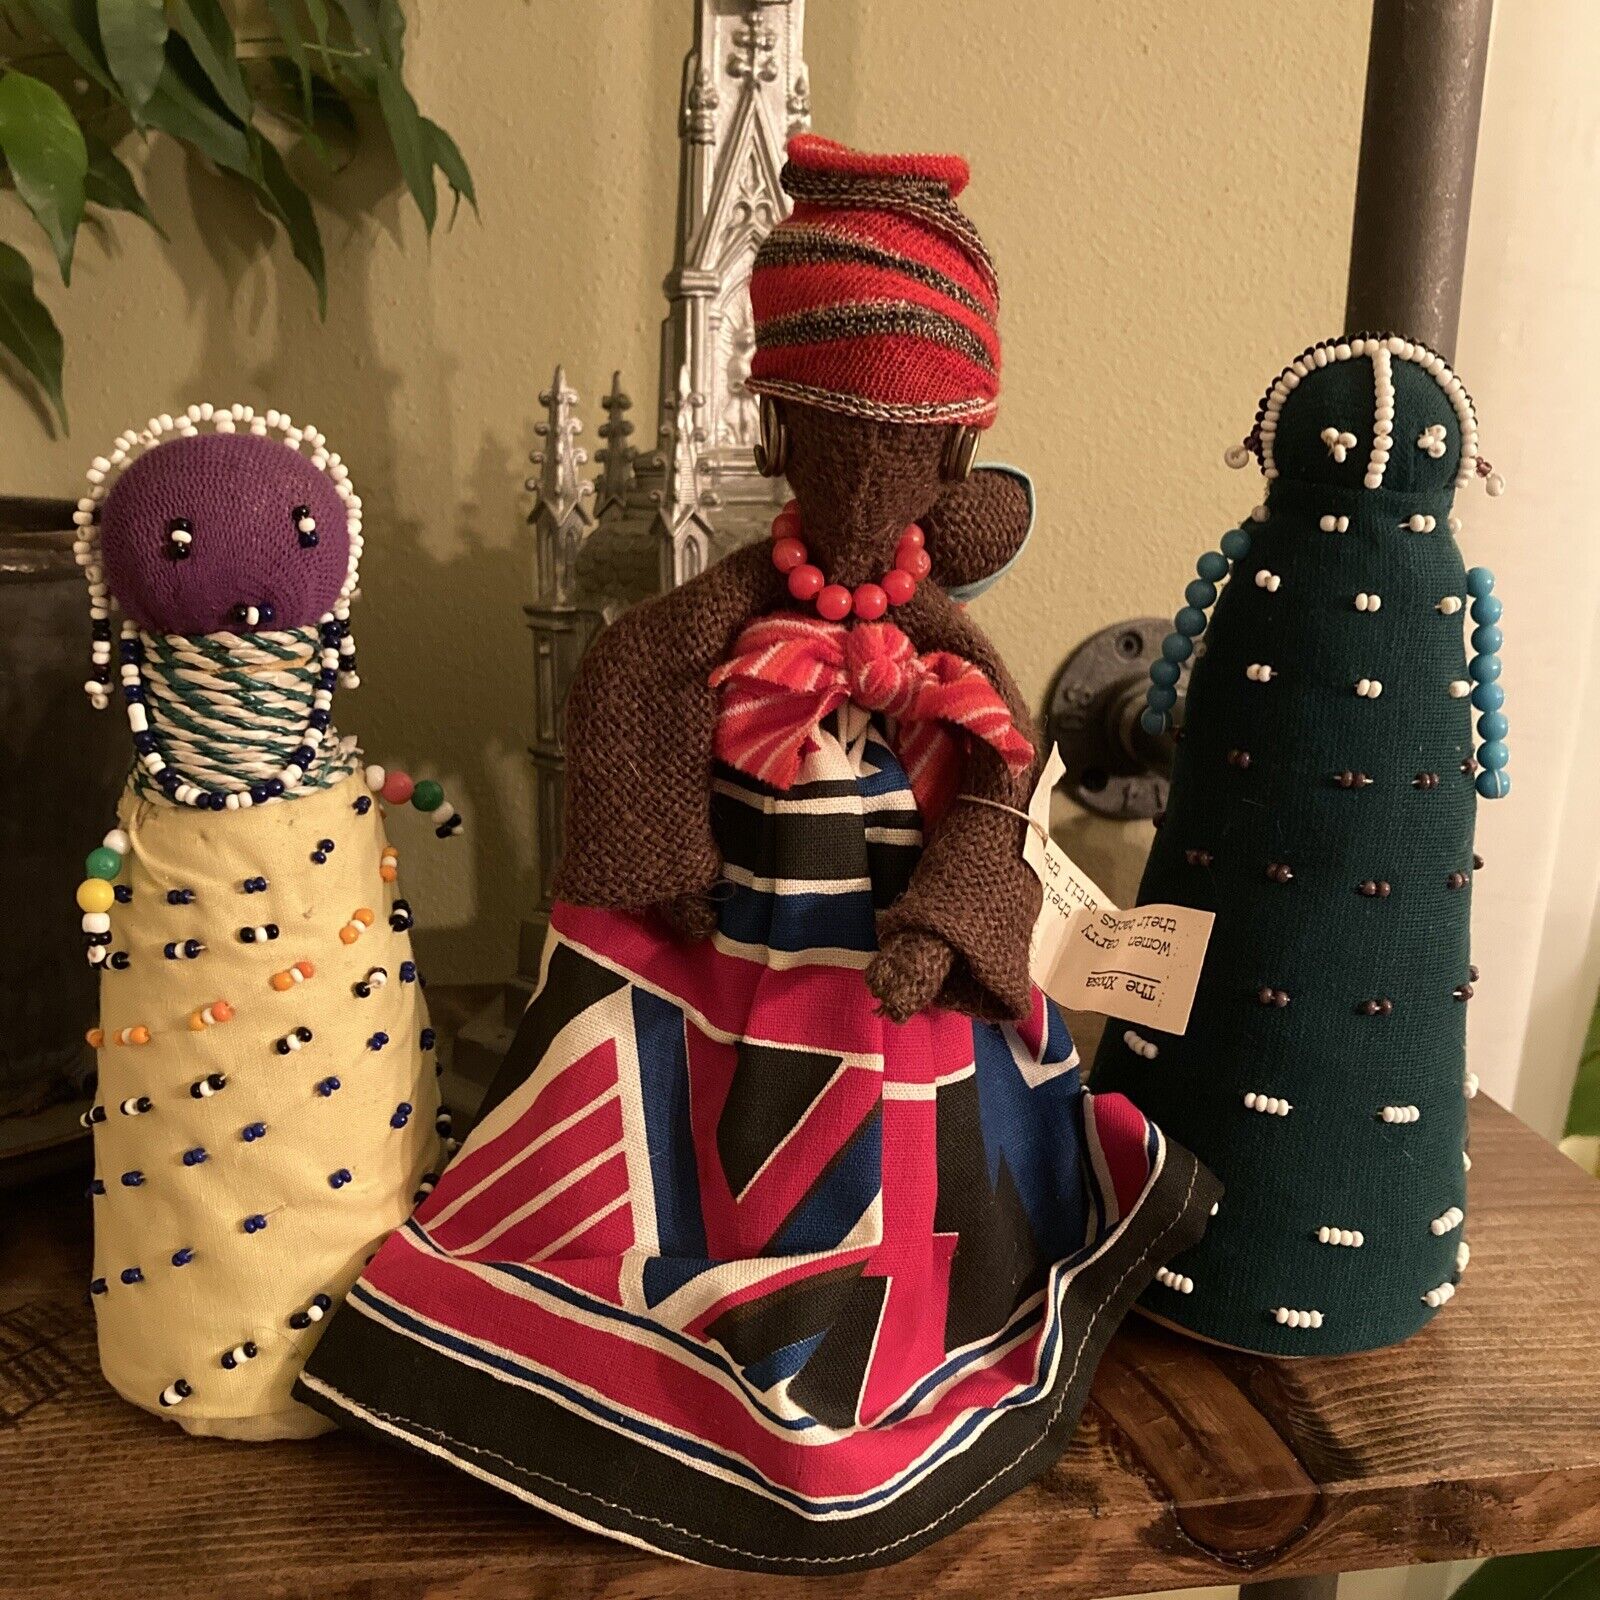 Vintage Ndebele Handmade South African Colorful Beaded Ceremonial Dolls Set Of 3